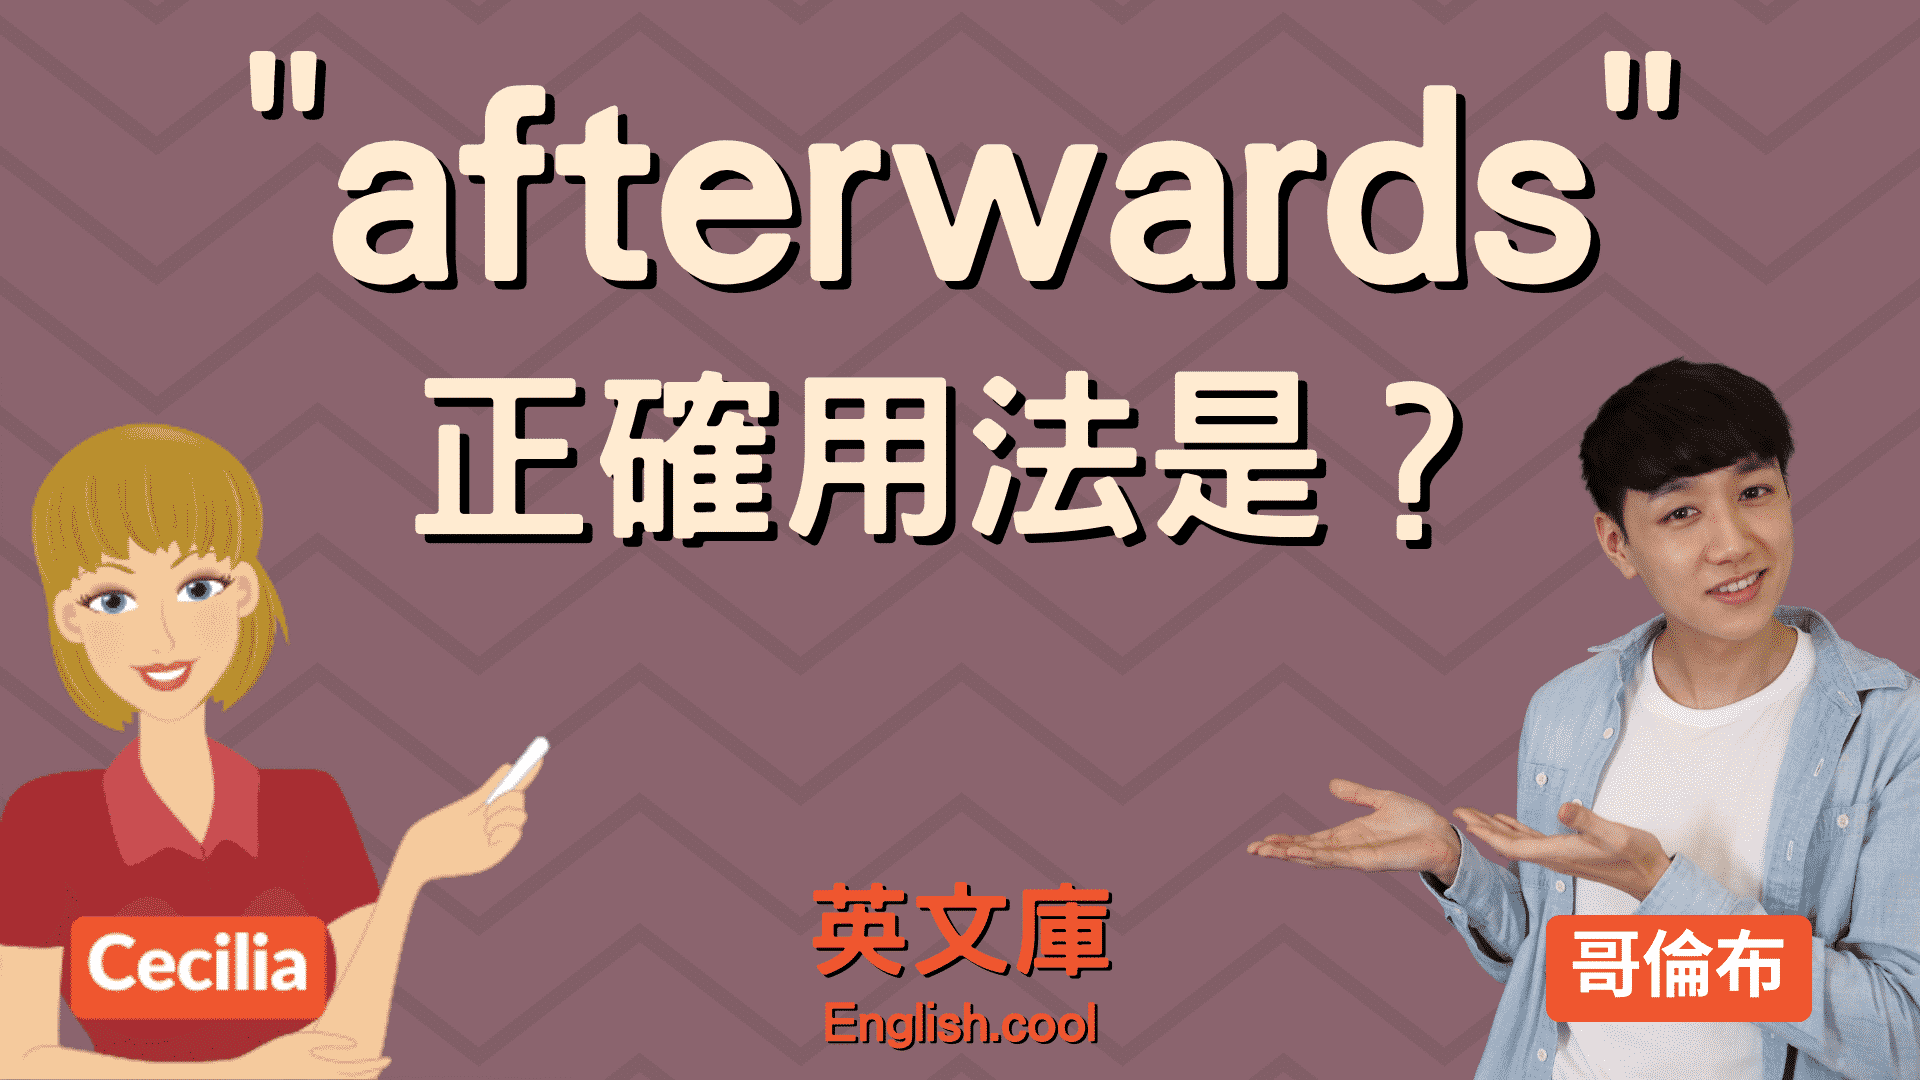 You are currently viewing 「afterwards」正確用法是？跟 afterward 有什麼差別？